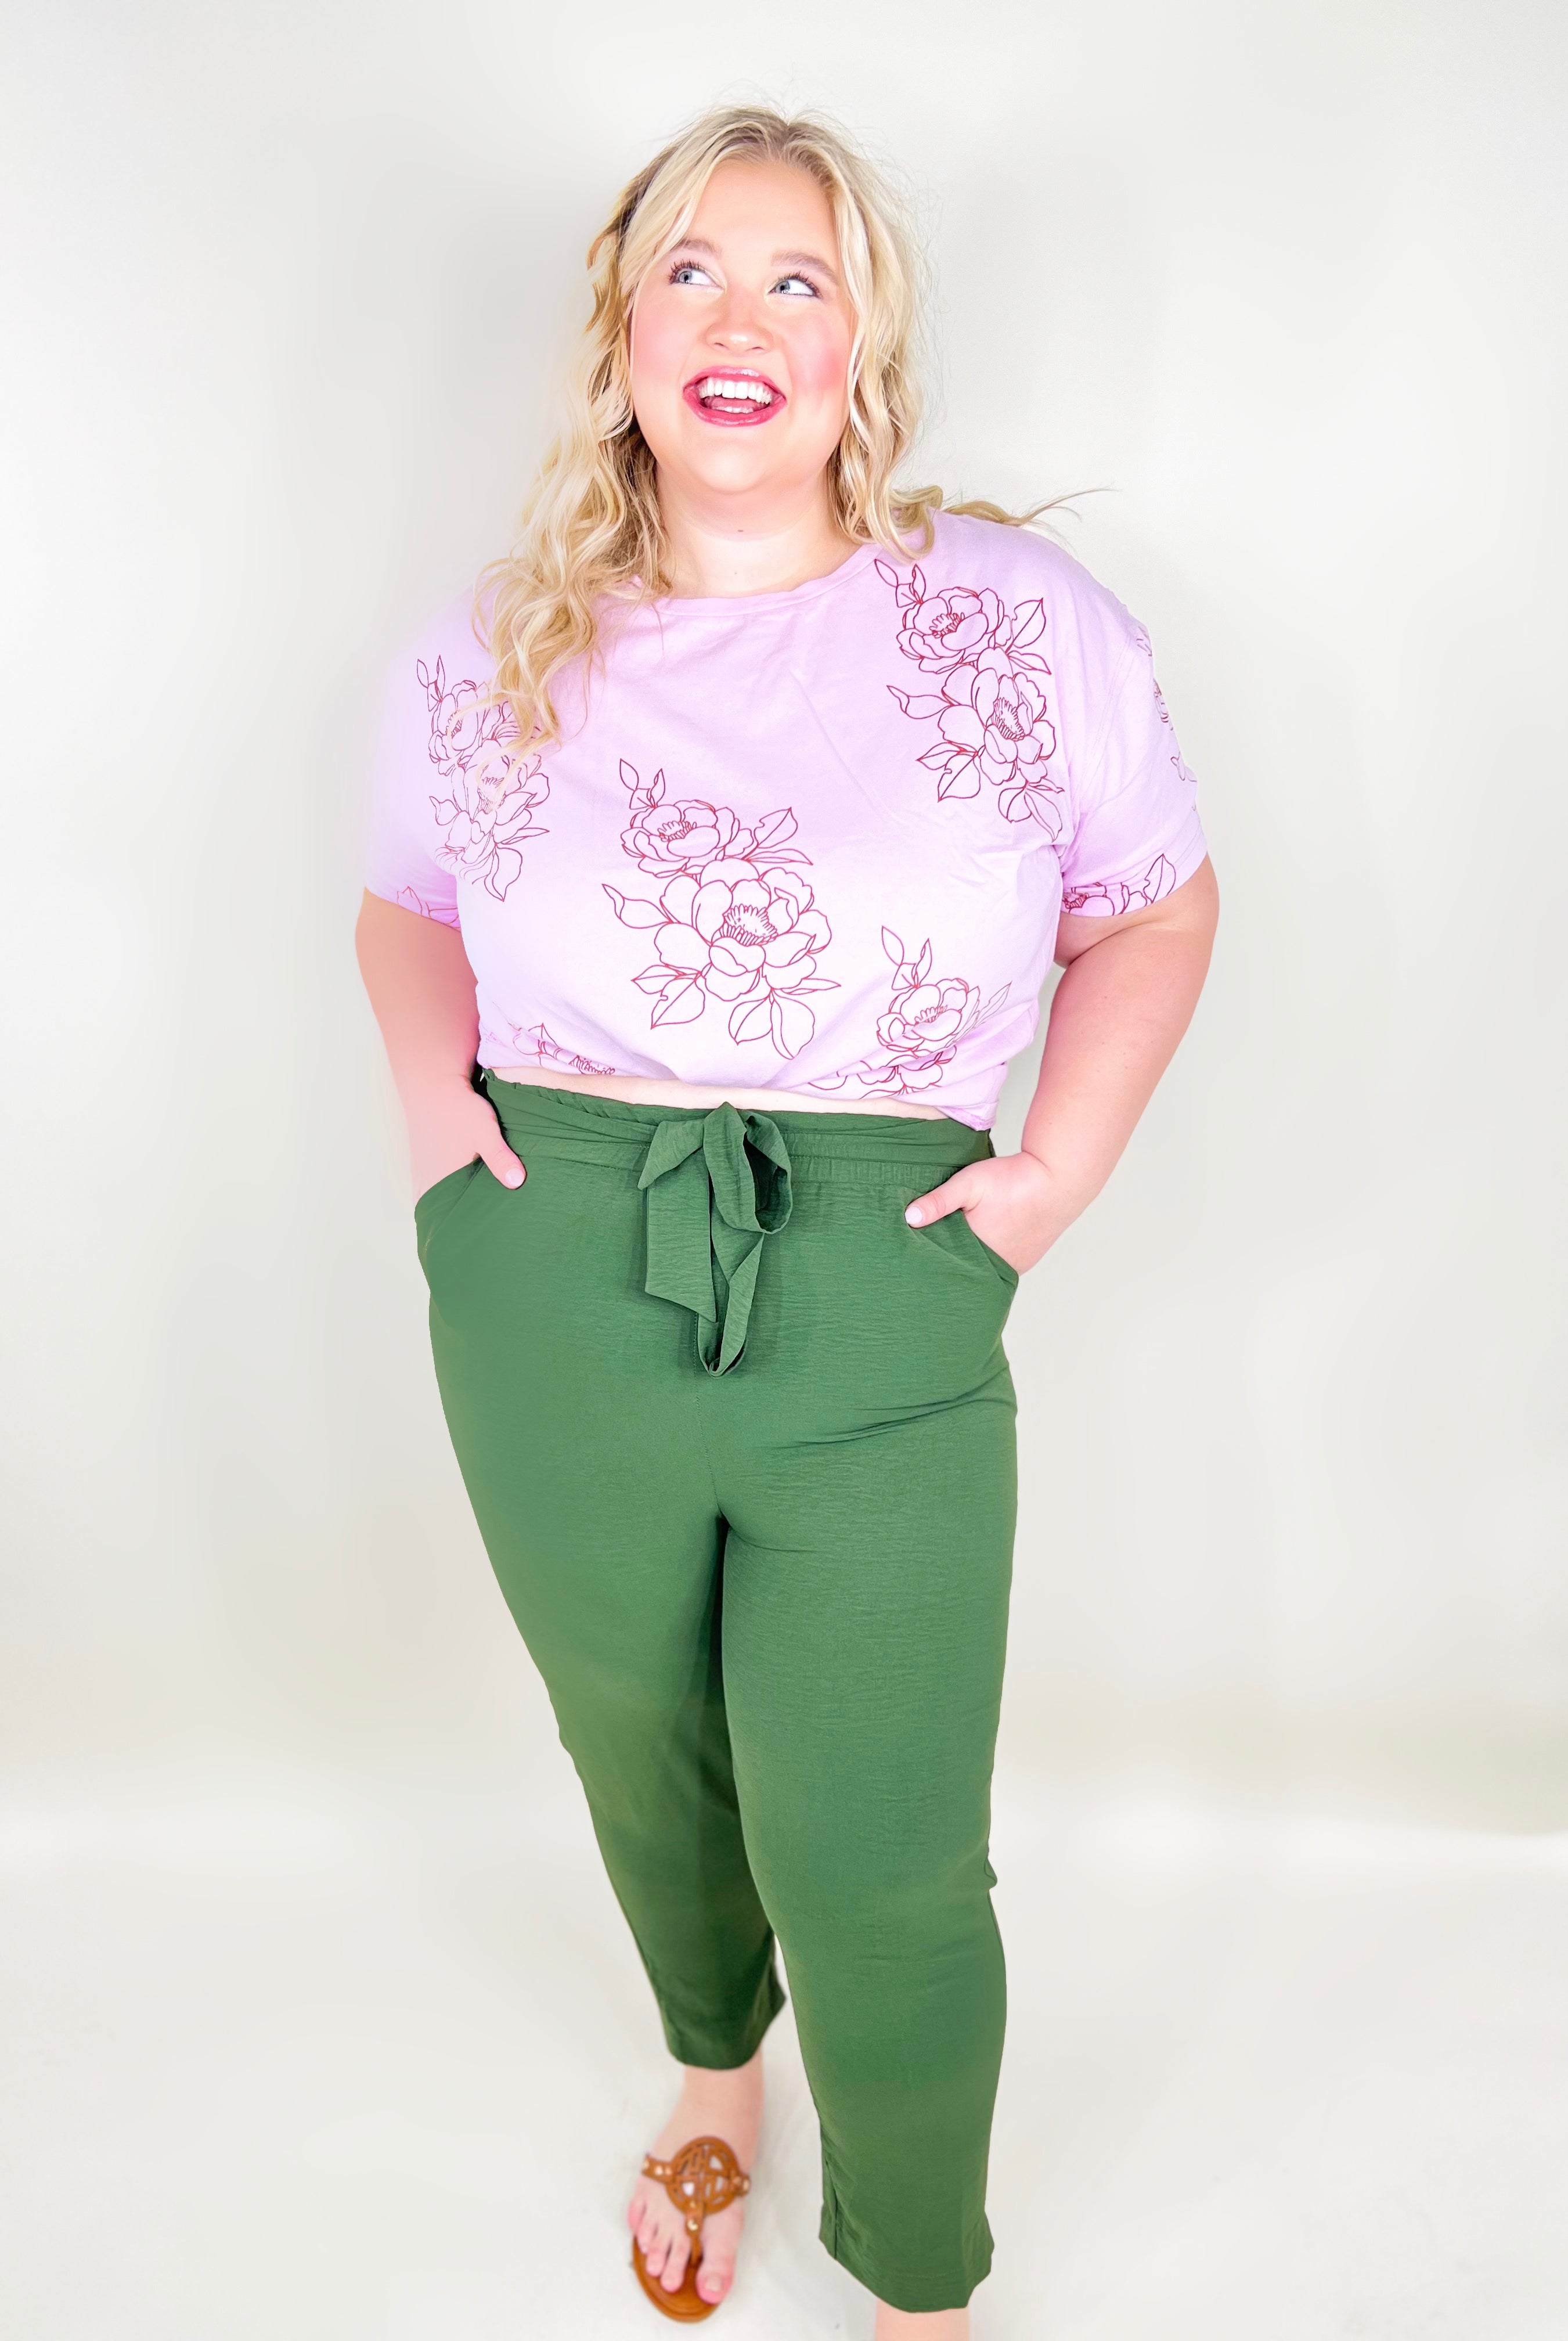 Ready For It All Bottoms-150 PANTS-White Birch-Heathered Boho Boutique, Women's Fashion and Accessories in Palmetto, FL